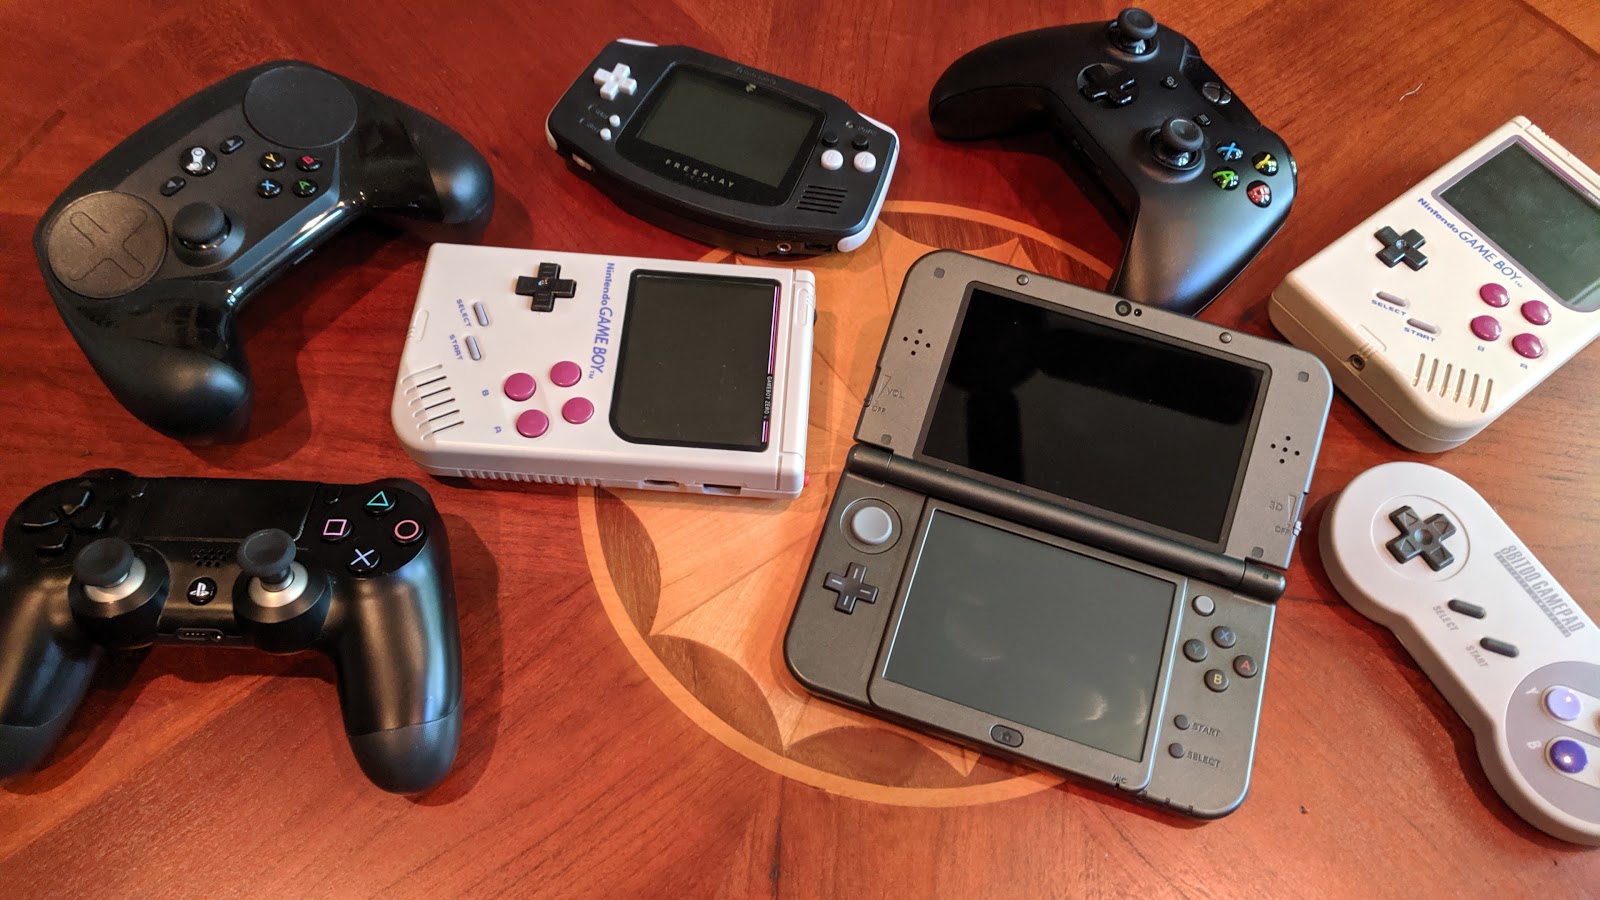 A collection of handheld game consoles and controllers. Included are a Steam Controller, a DualShock 4, two classic Game Boy-based handhelds, a classic Game Boy Advance-based Freeplay Advance, an Xbox One controller, a New Nintendo 3DS XL, an an 8BitDo SNES30 controller.